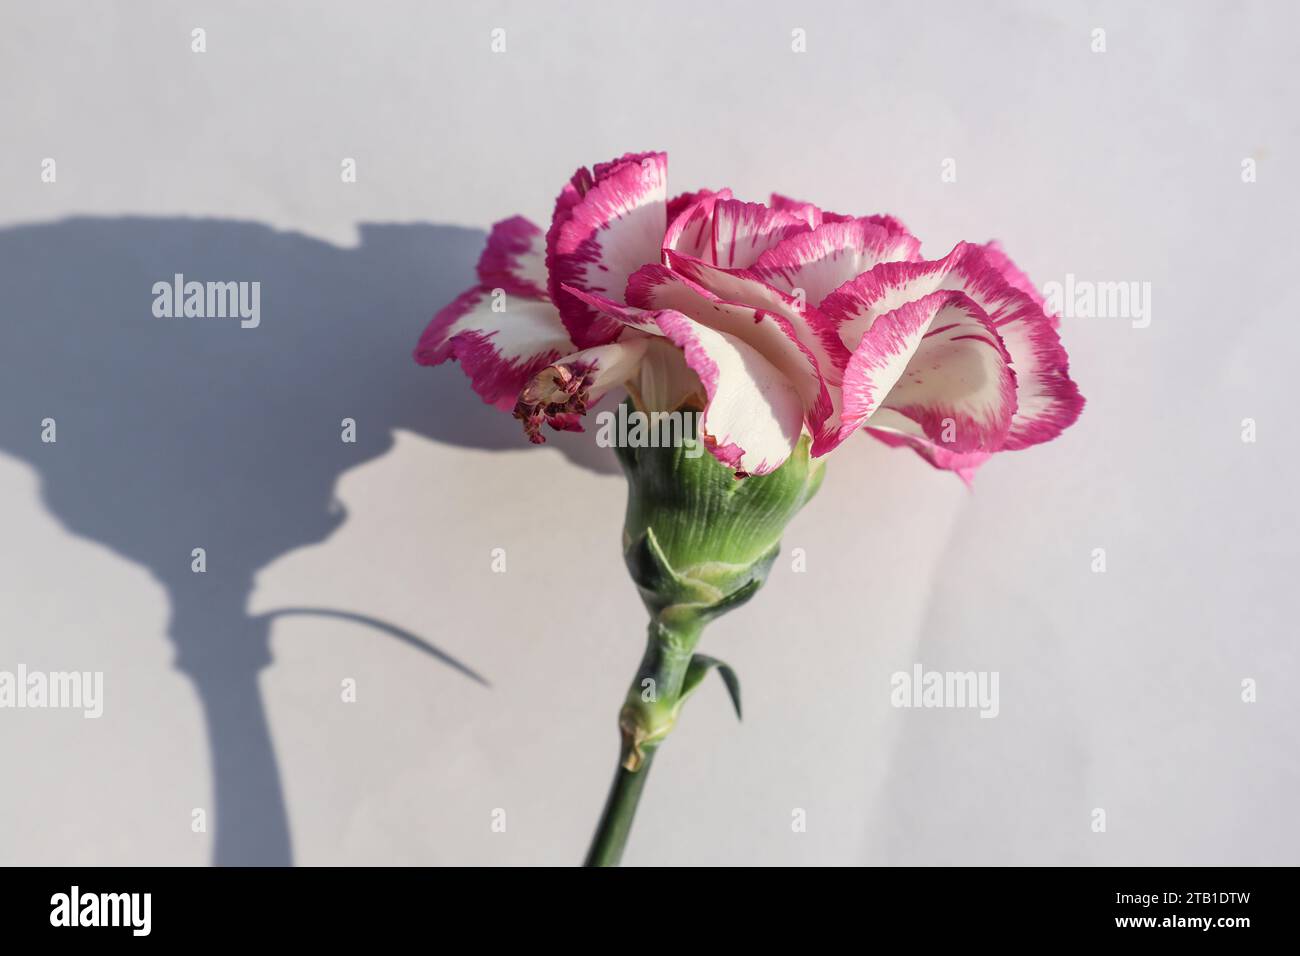 Beautiful fresh Carnation with fringed White petals with bright pink outline border on white background Stock Photo